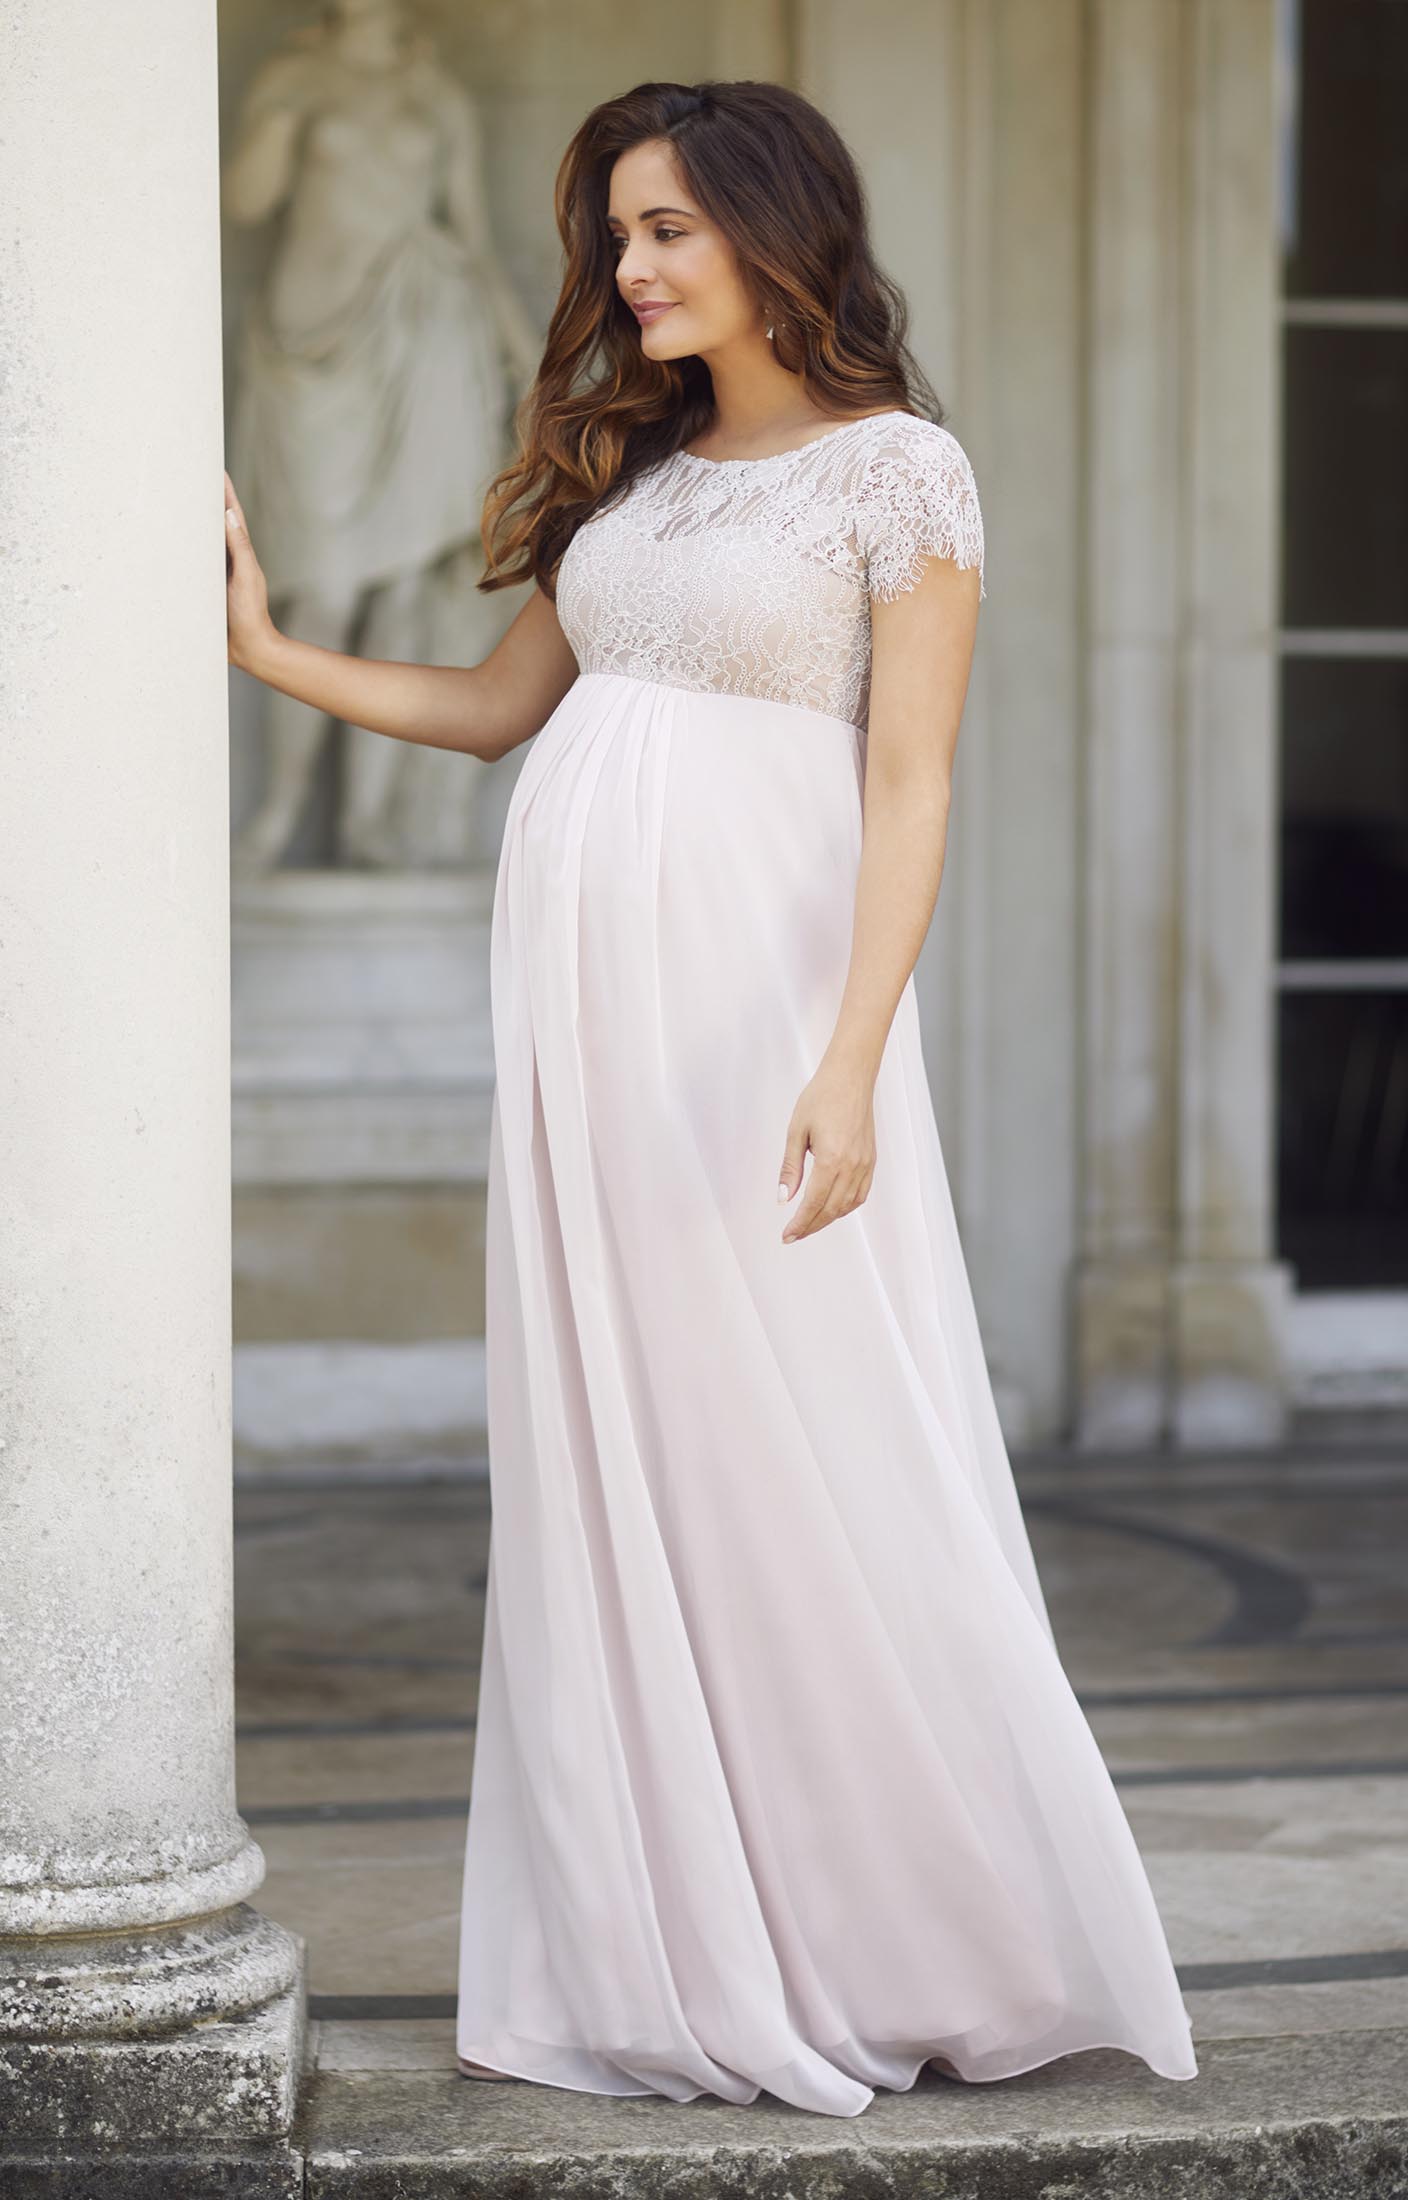 Plus Size V Neck Tulle Maternity Prom Dresses With Sparkly Sequins For  Formal Occasions In Dubai, Saudi Arabia, And Arabic Style From Greatvip,  $96.61 | DHgate.Com